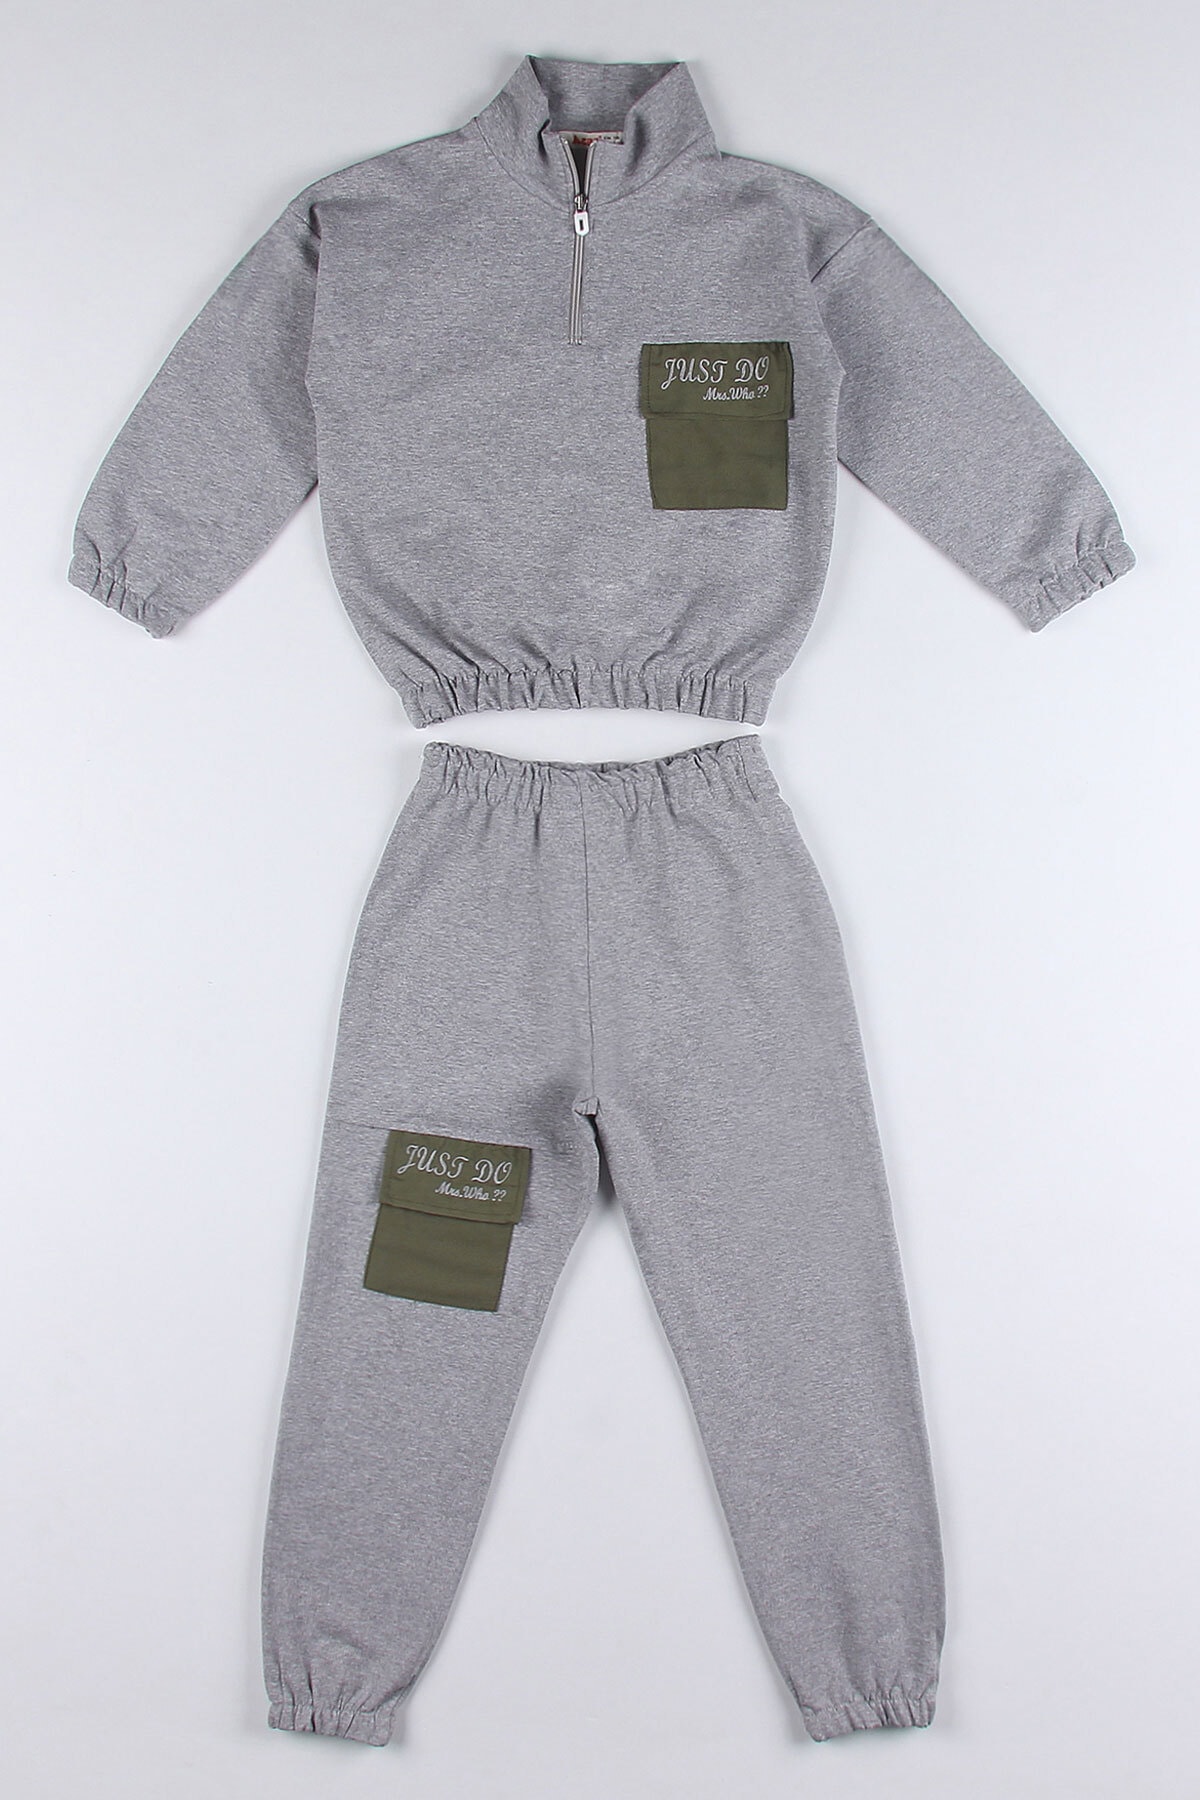 zepkids Girl's Gray Colored Just Do Printed Tracksuit Set with Pockets, Zipper and Elastic Waist.